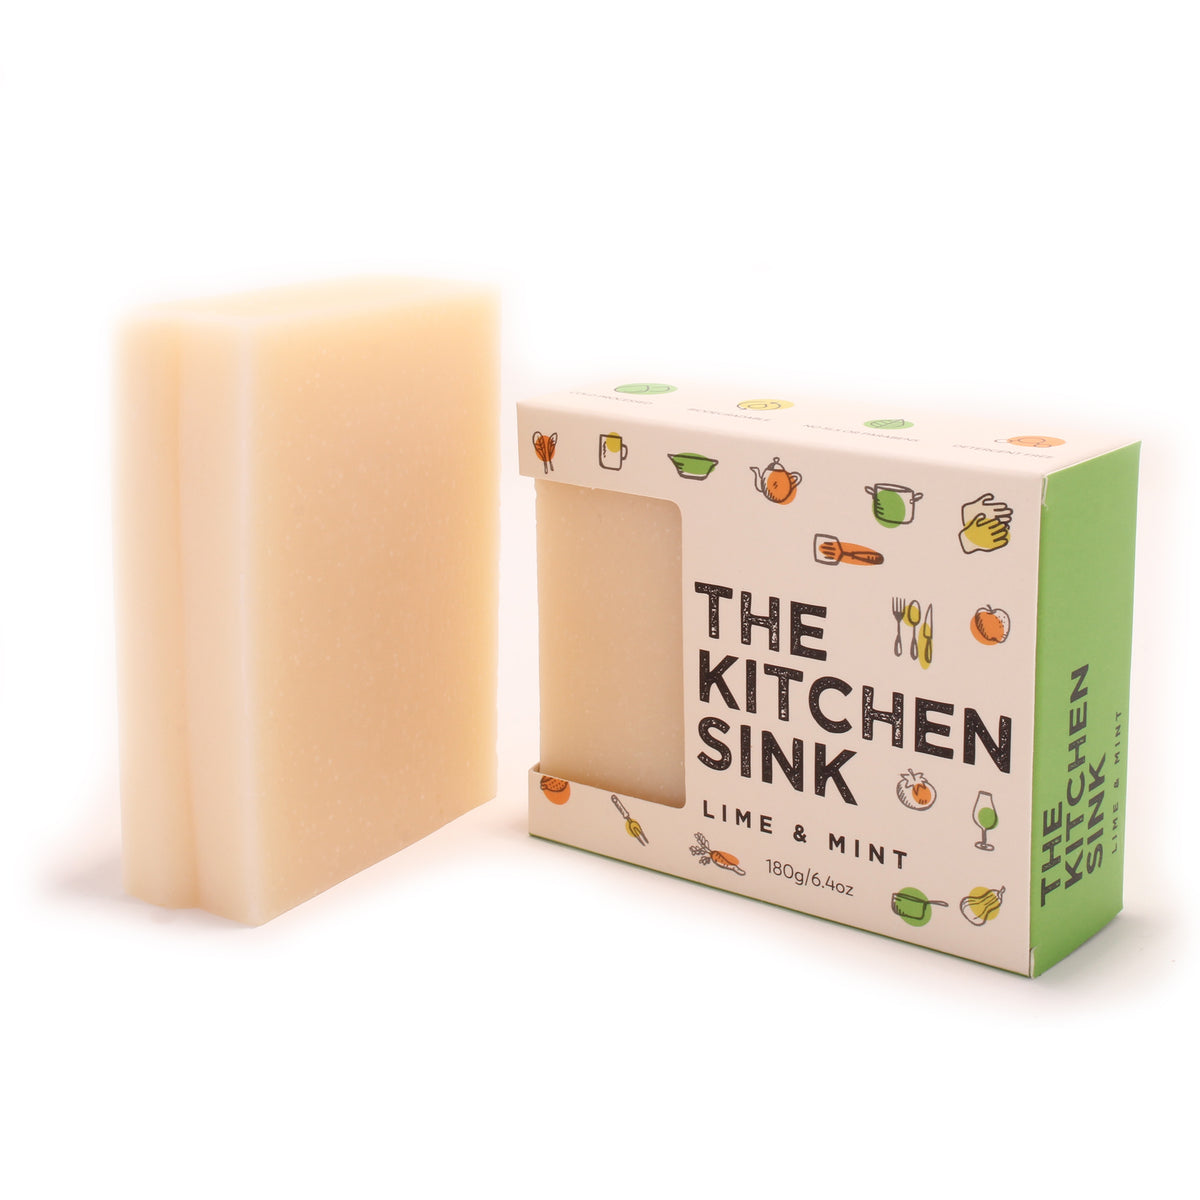 A bar of the Kitchen Sink soap bar for the kitchen in the box and naked..